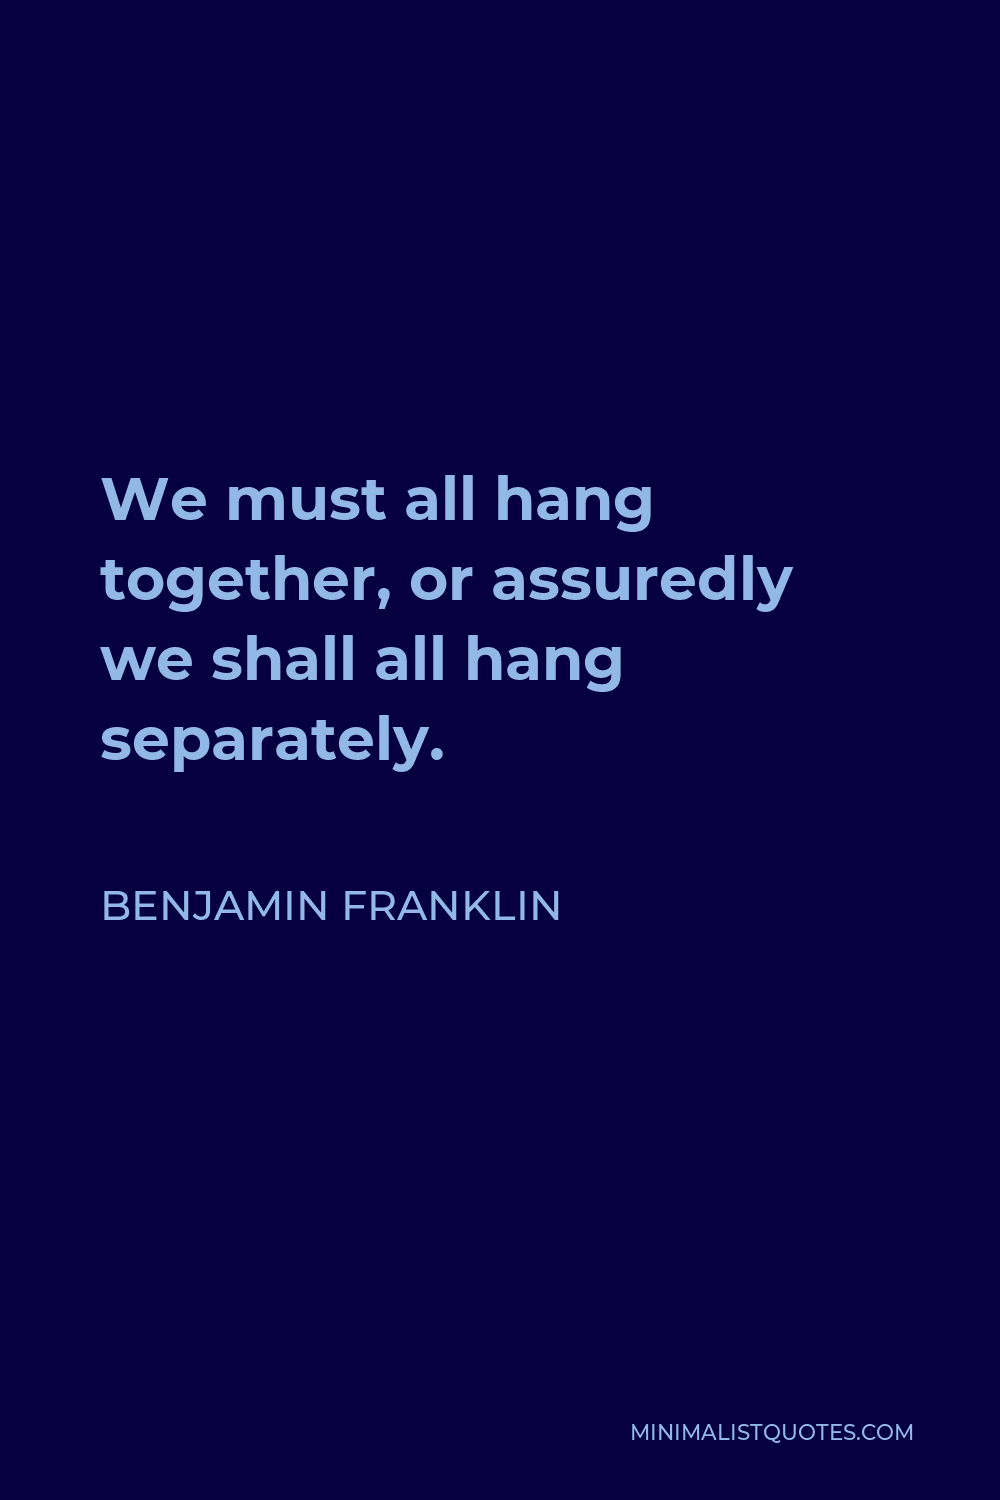 Benjamin Franklin Quote - We must all hang together, or assuredly we shall all hang separately.